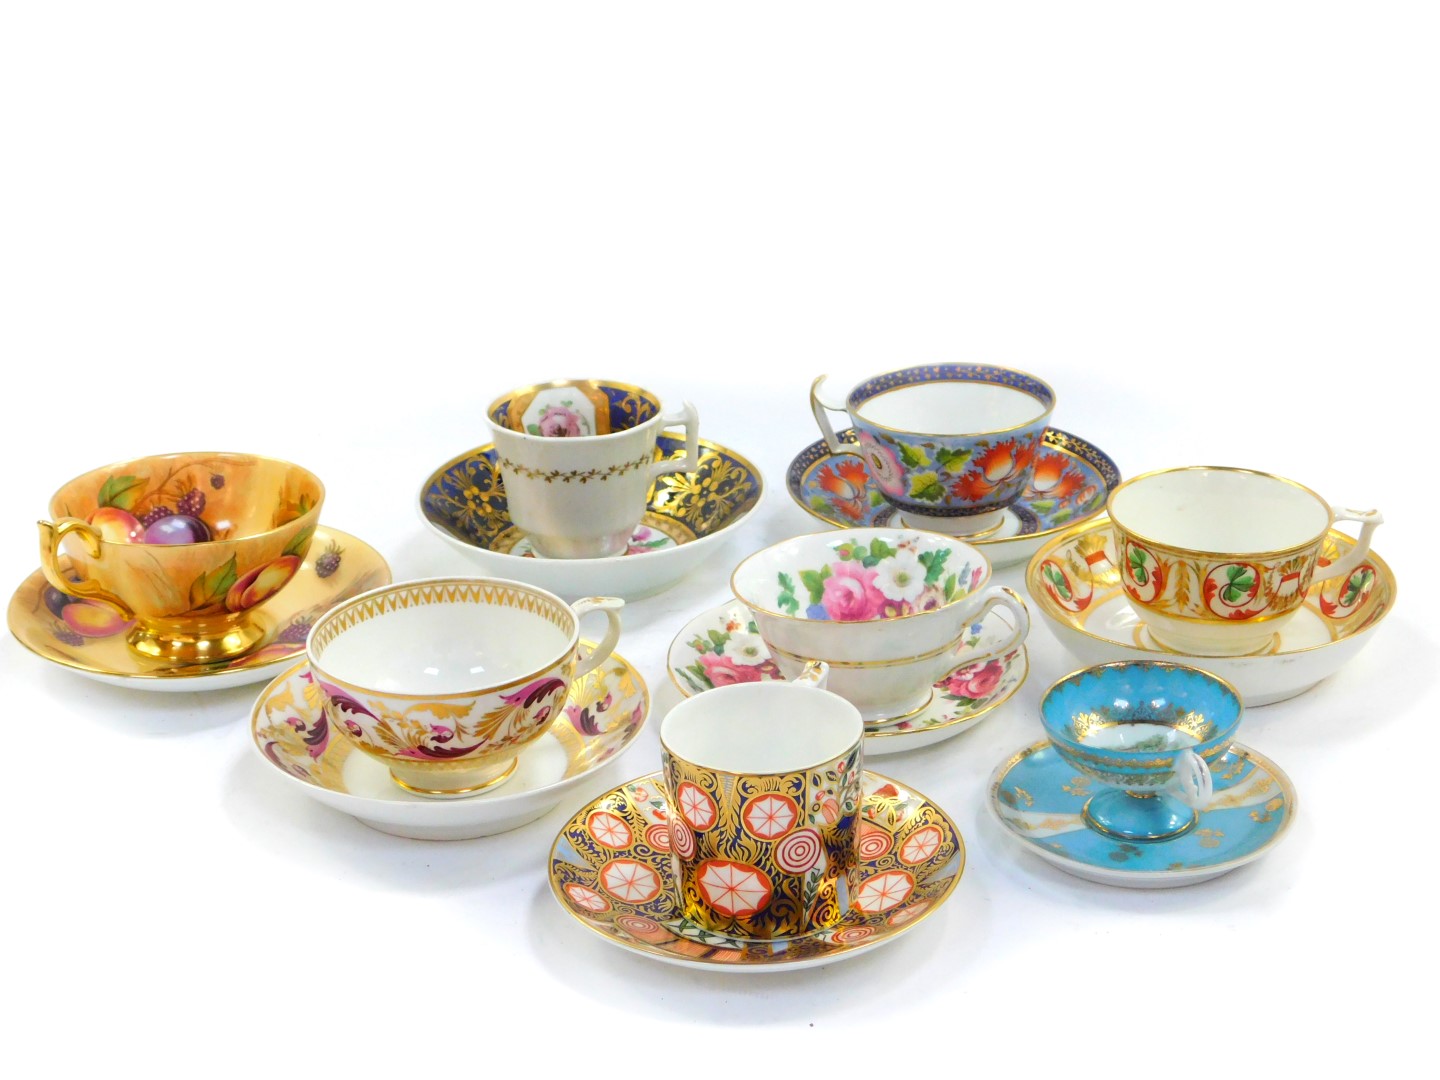 Early 19thC and later porcelain tea and coffee wares, including an Aynsley porcelain cup and saucer